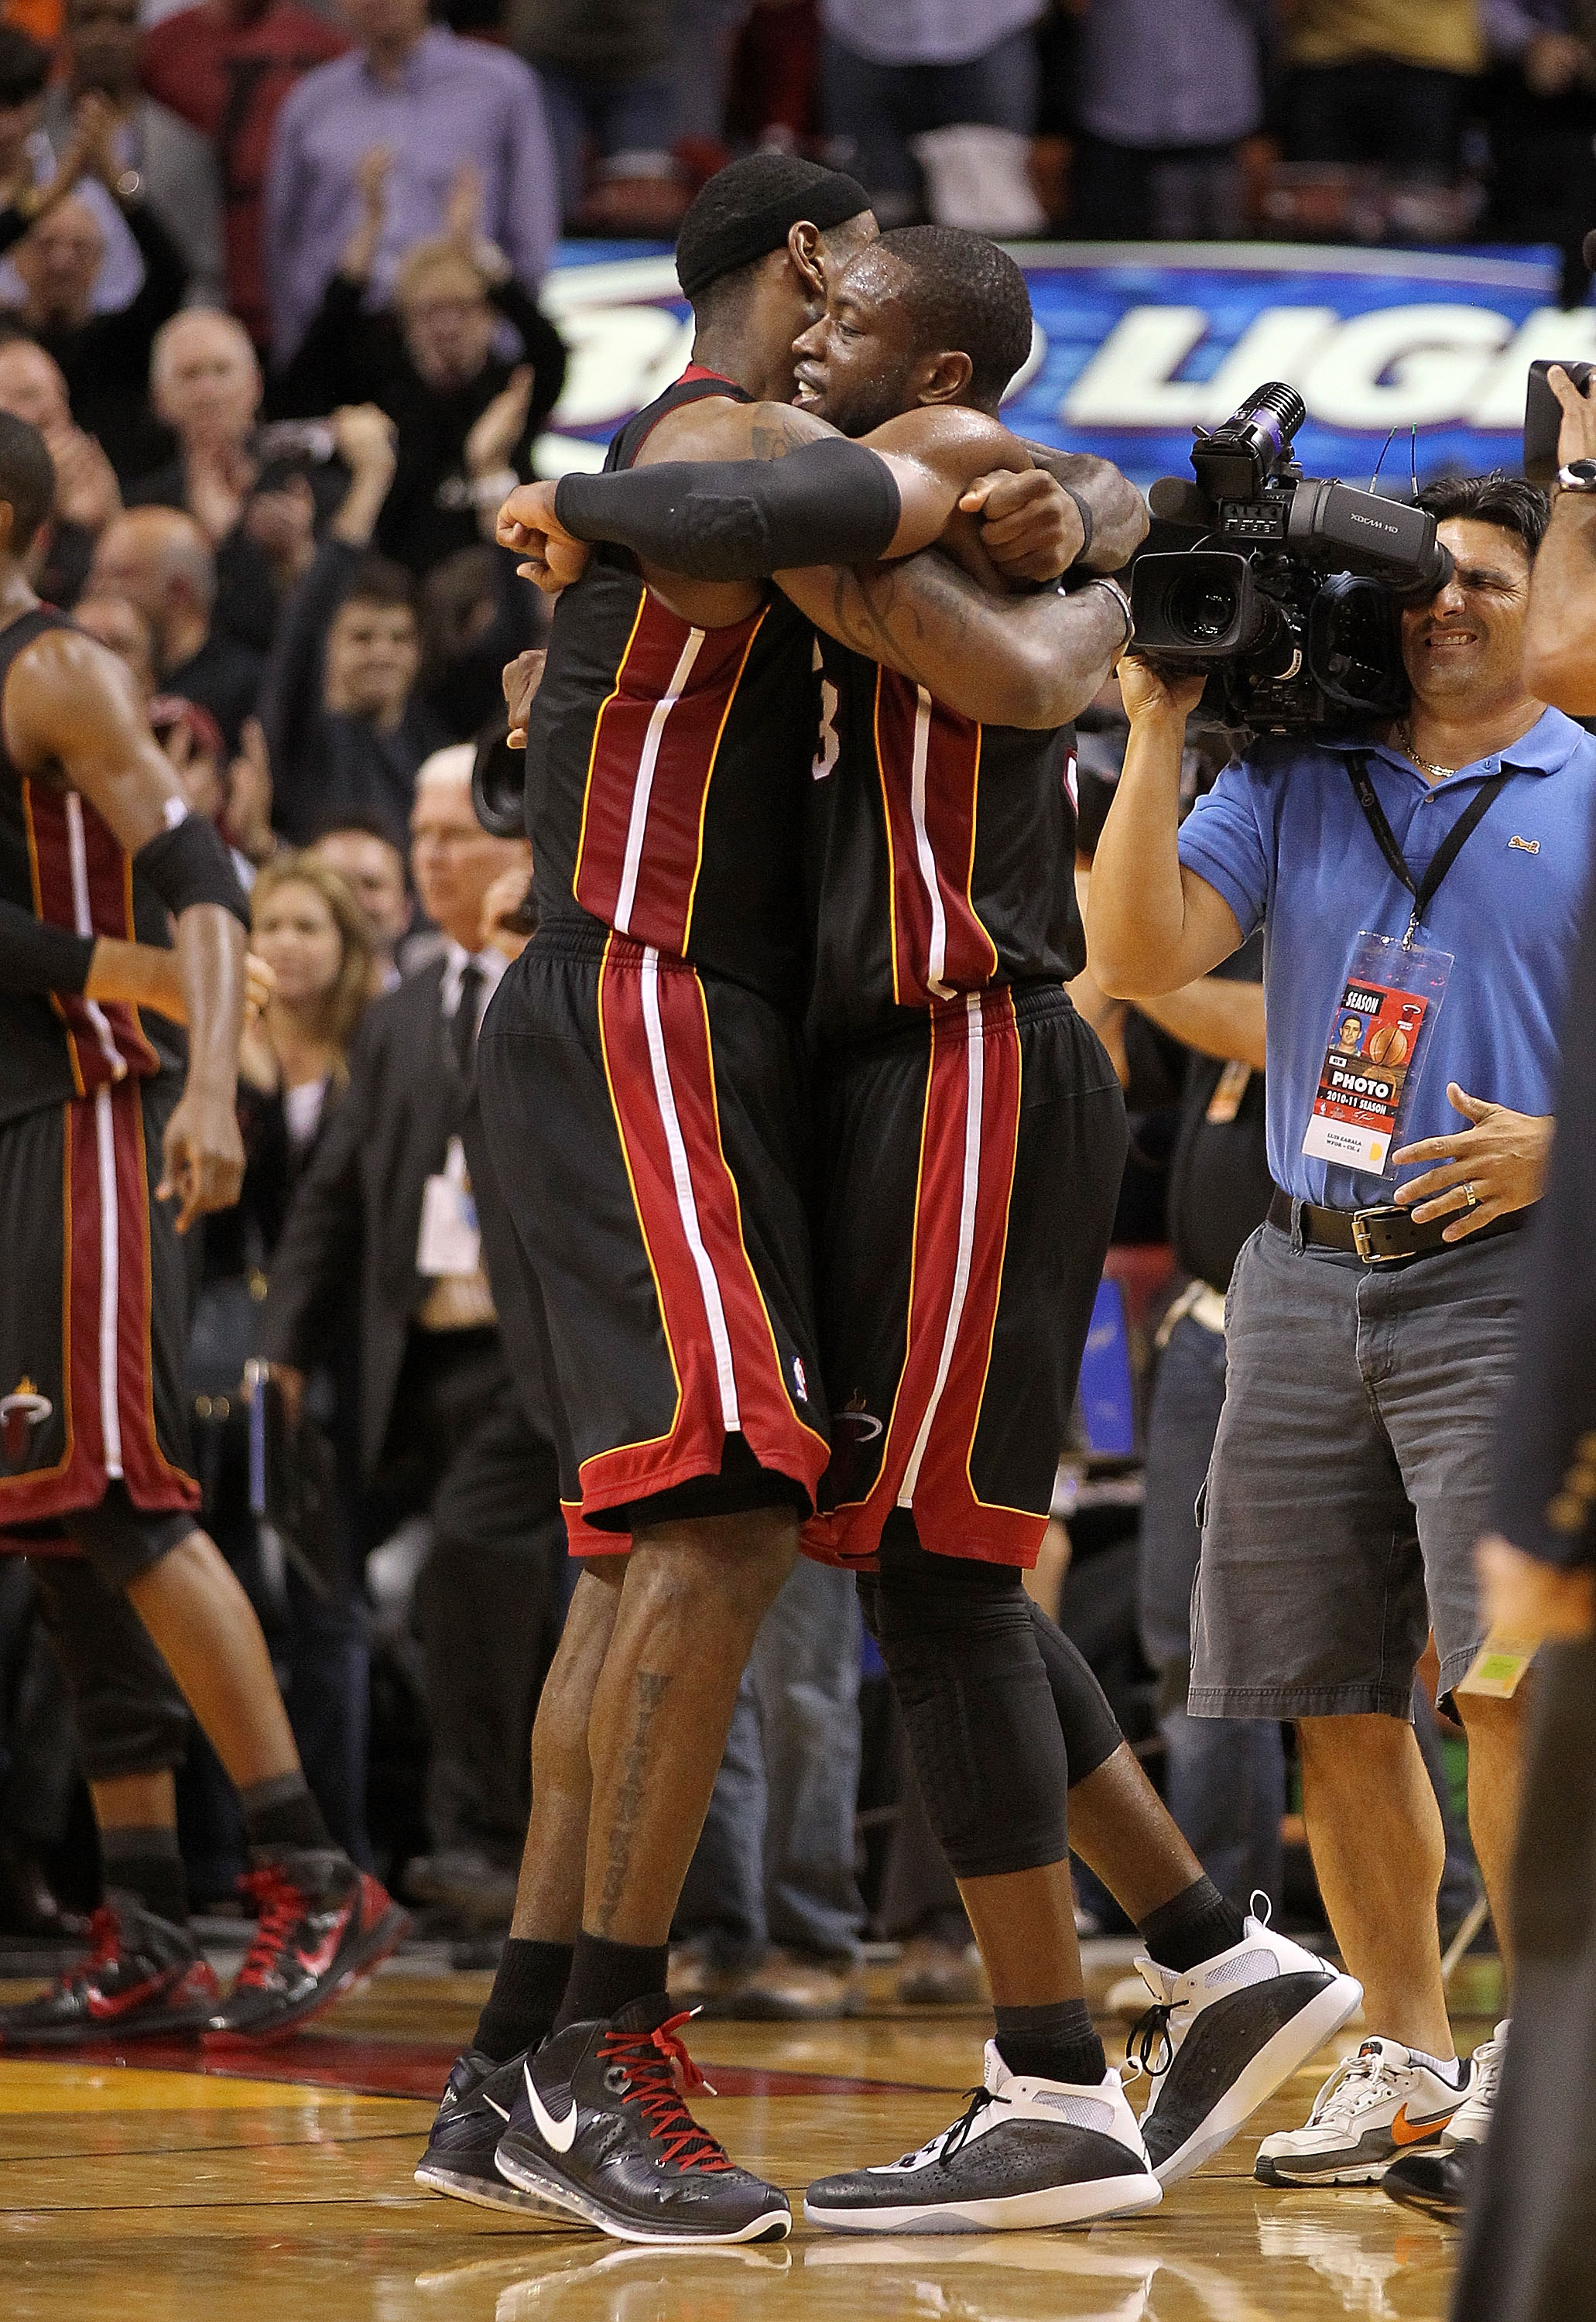 Miami Heat Won't Win an NBA Title with so Many Mental Lapses